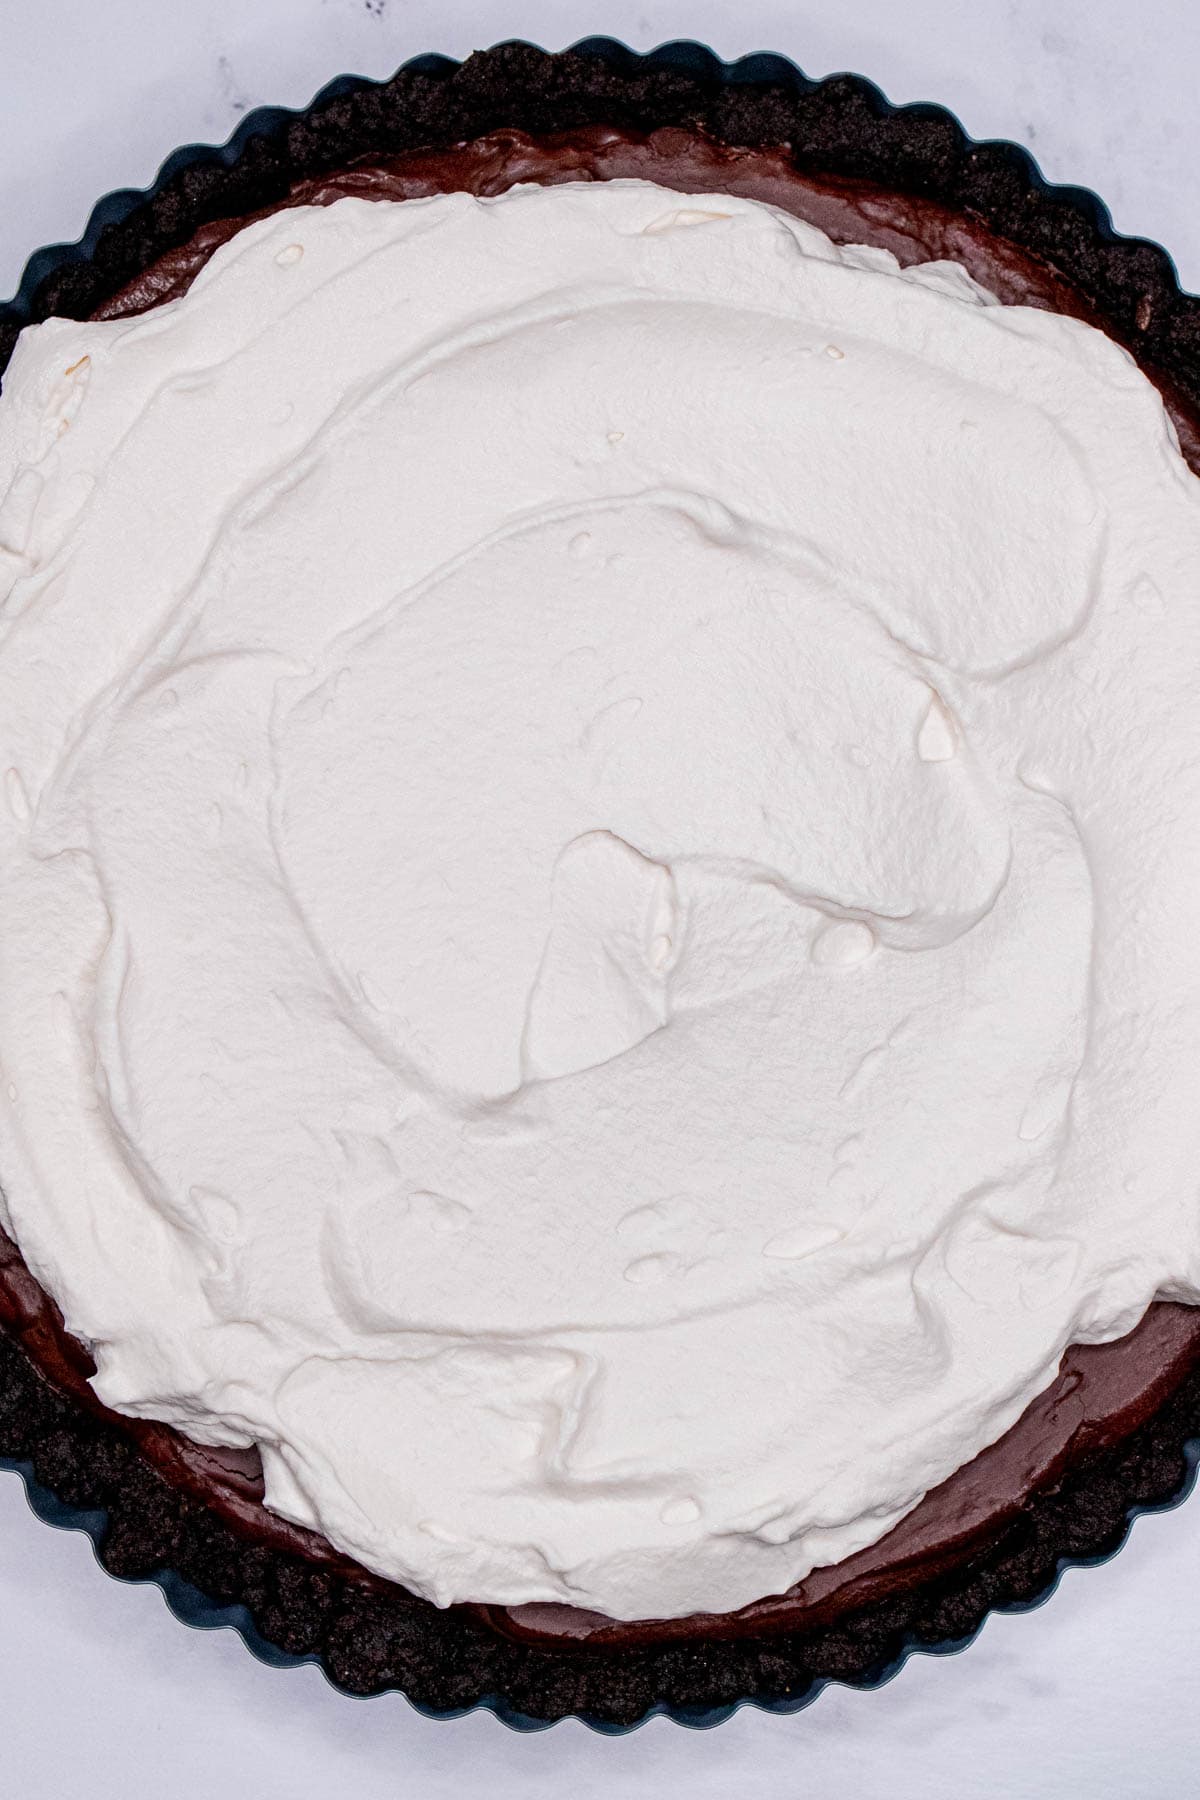 A dark chocolate tart topped with whipped cream.